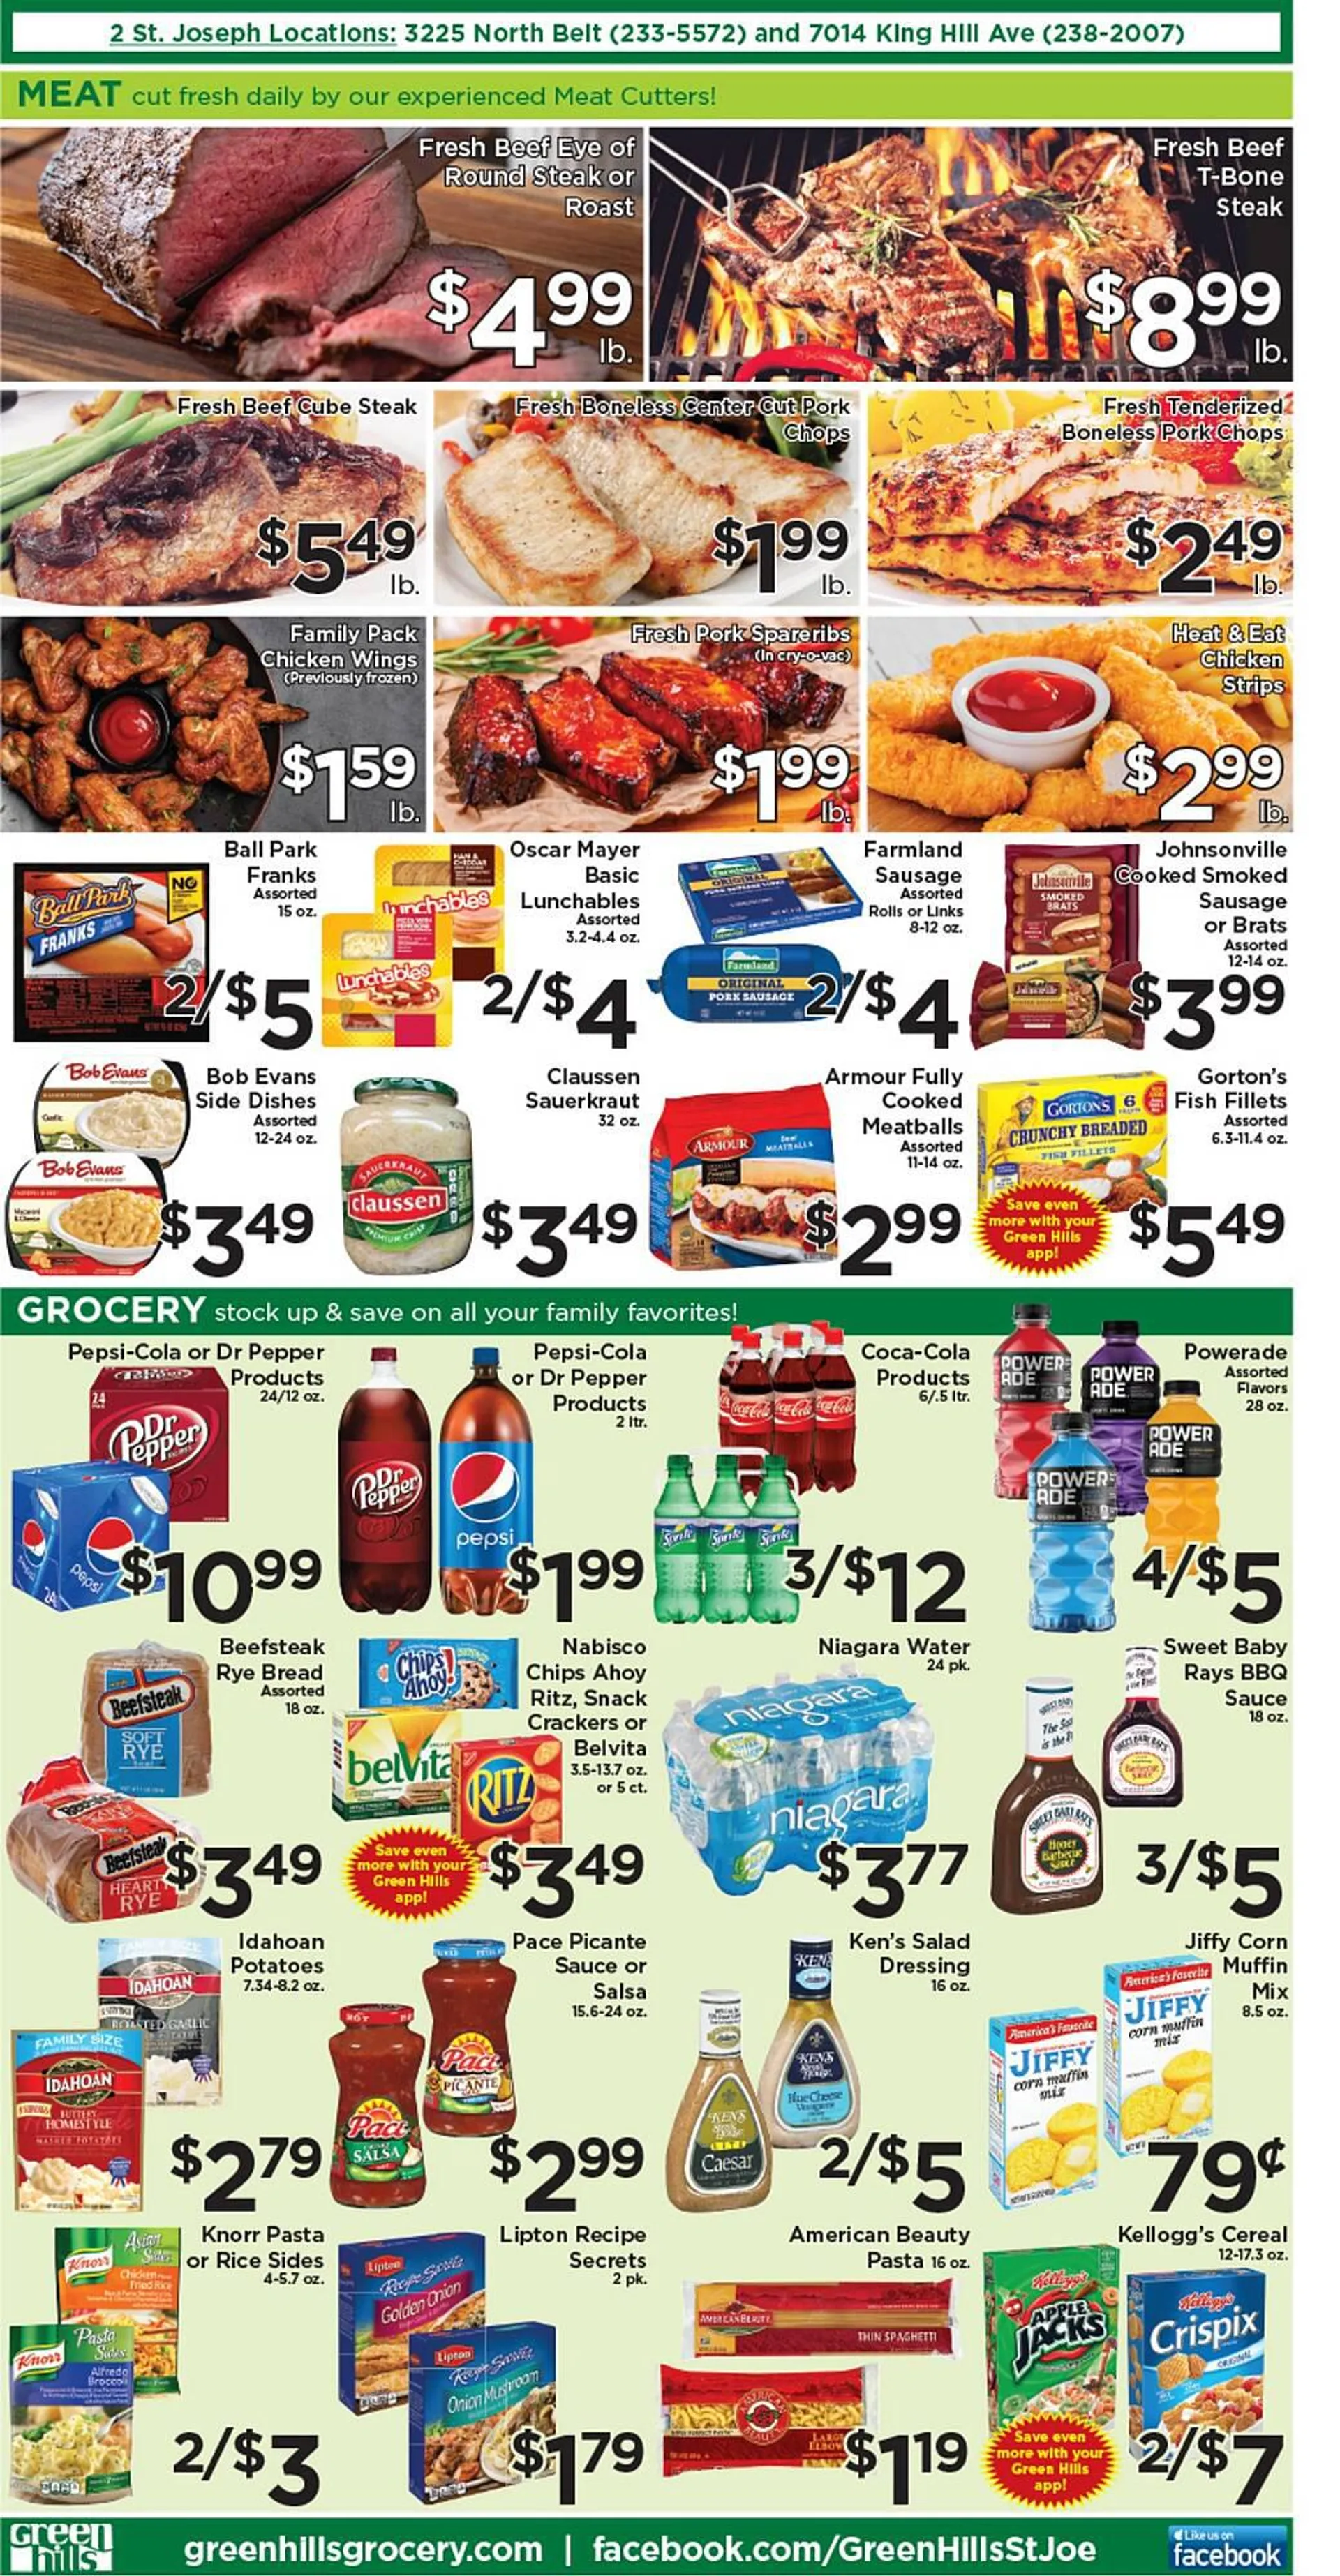 Green Hills Grocery ad - 3